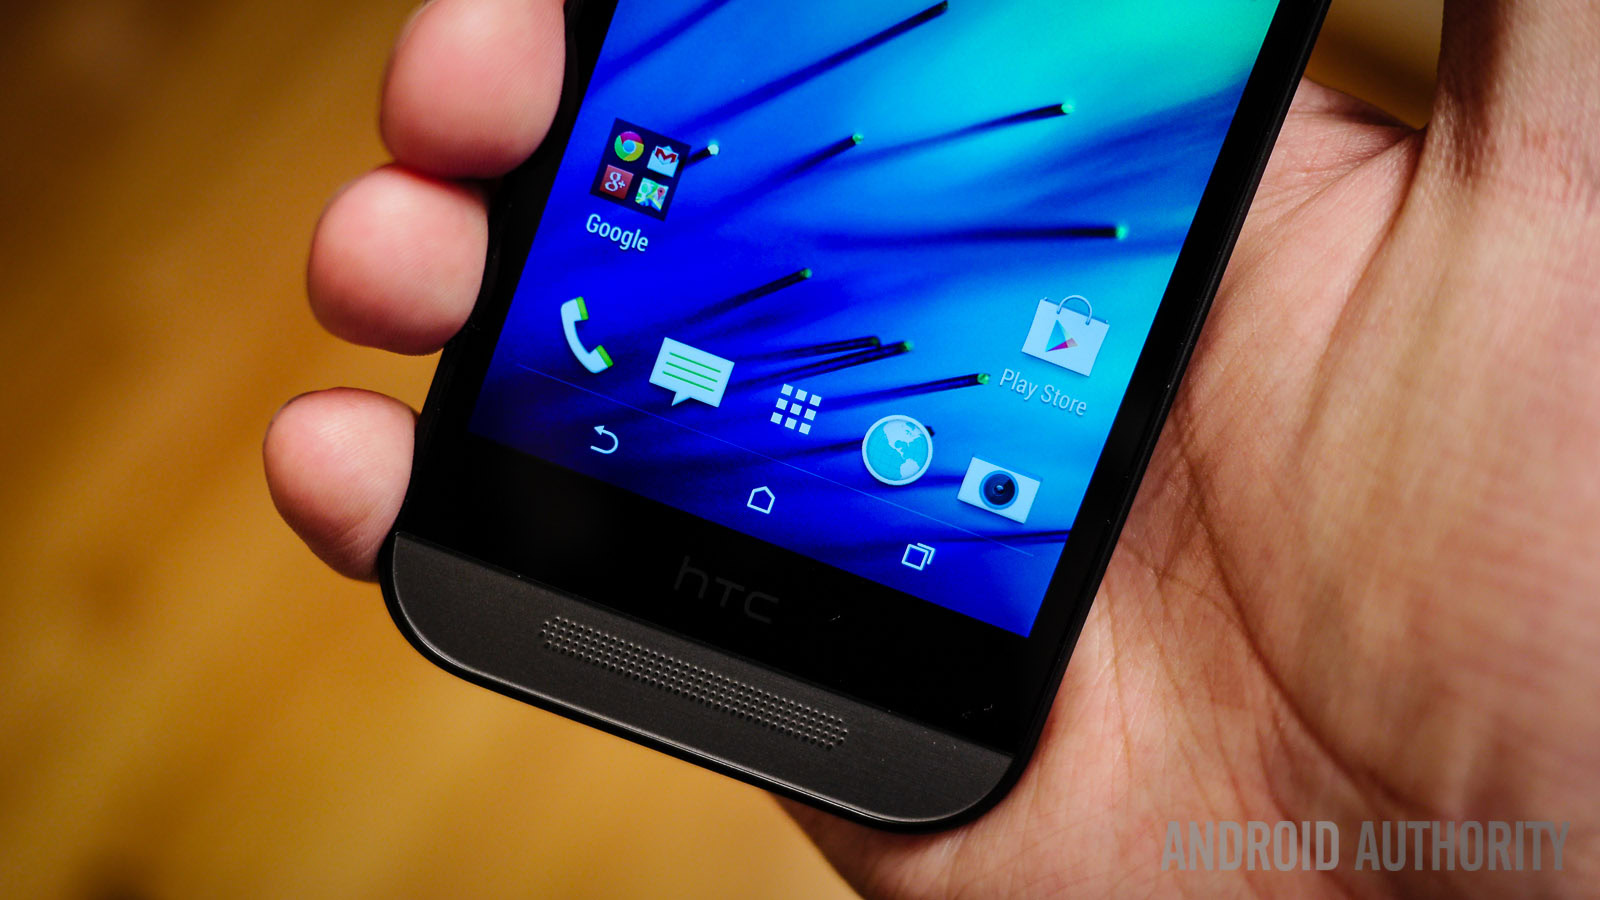 HTC One Mini 2 specs, features, and availability announced